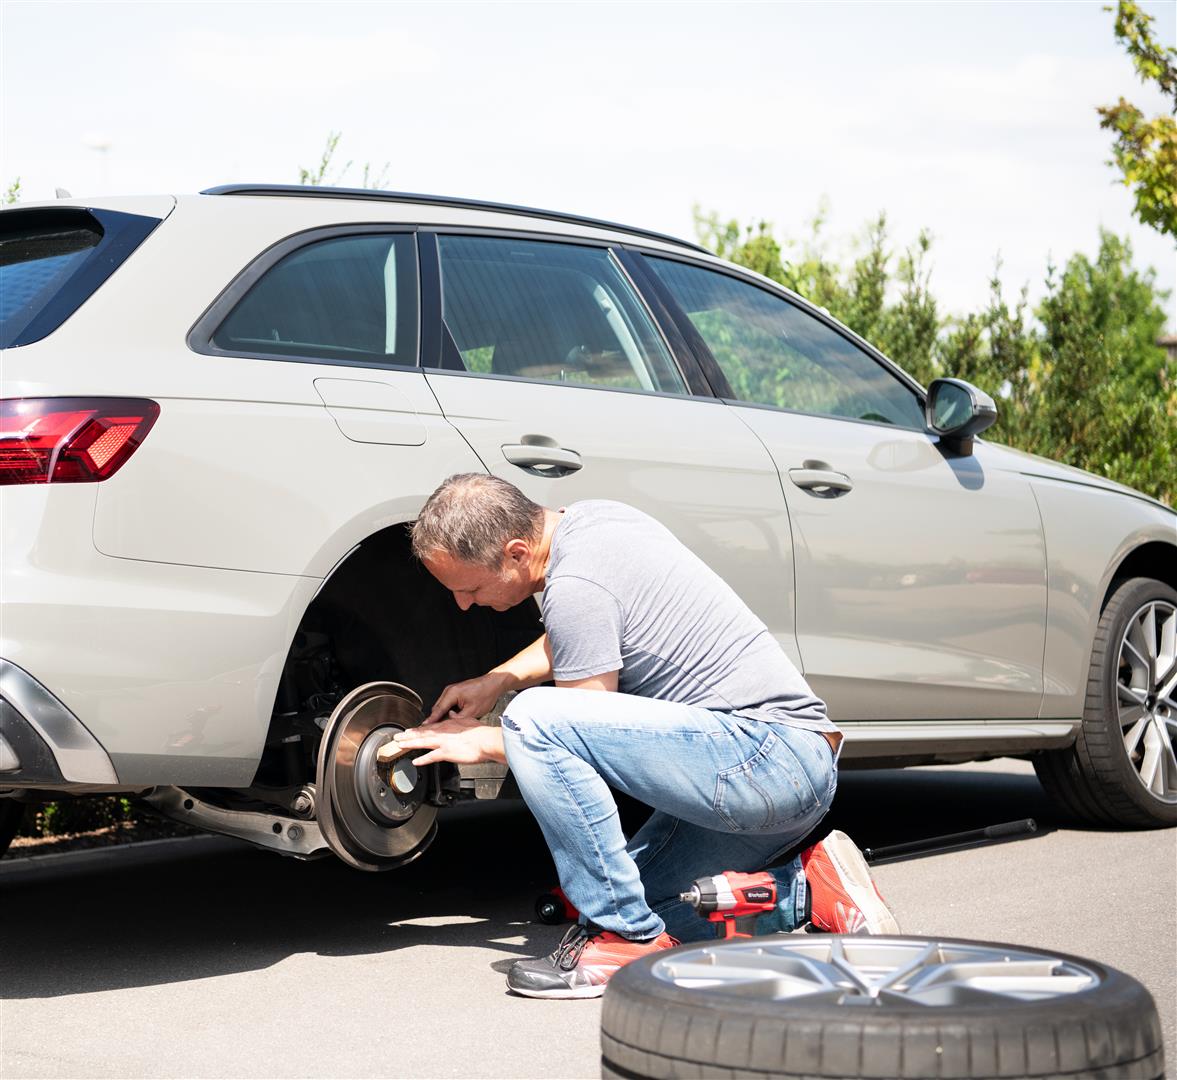 a man cleans the brake discs of his car